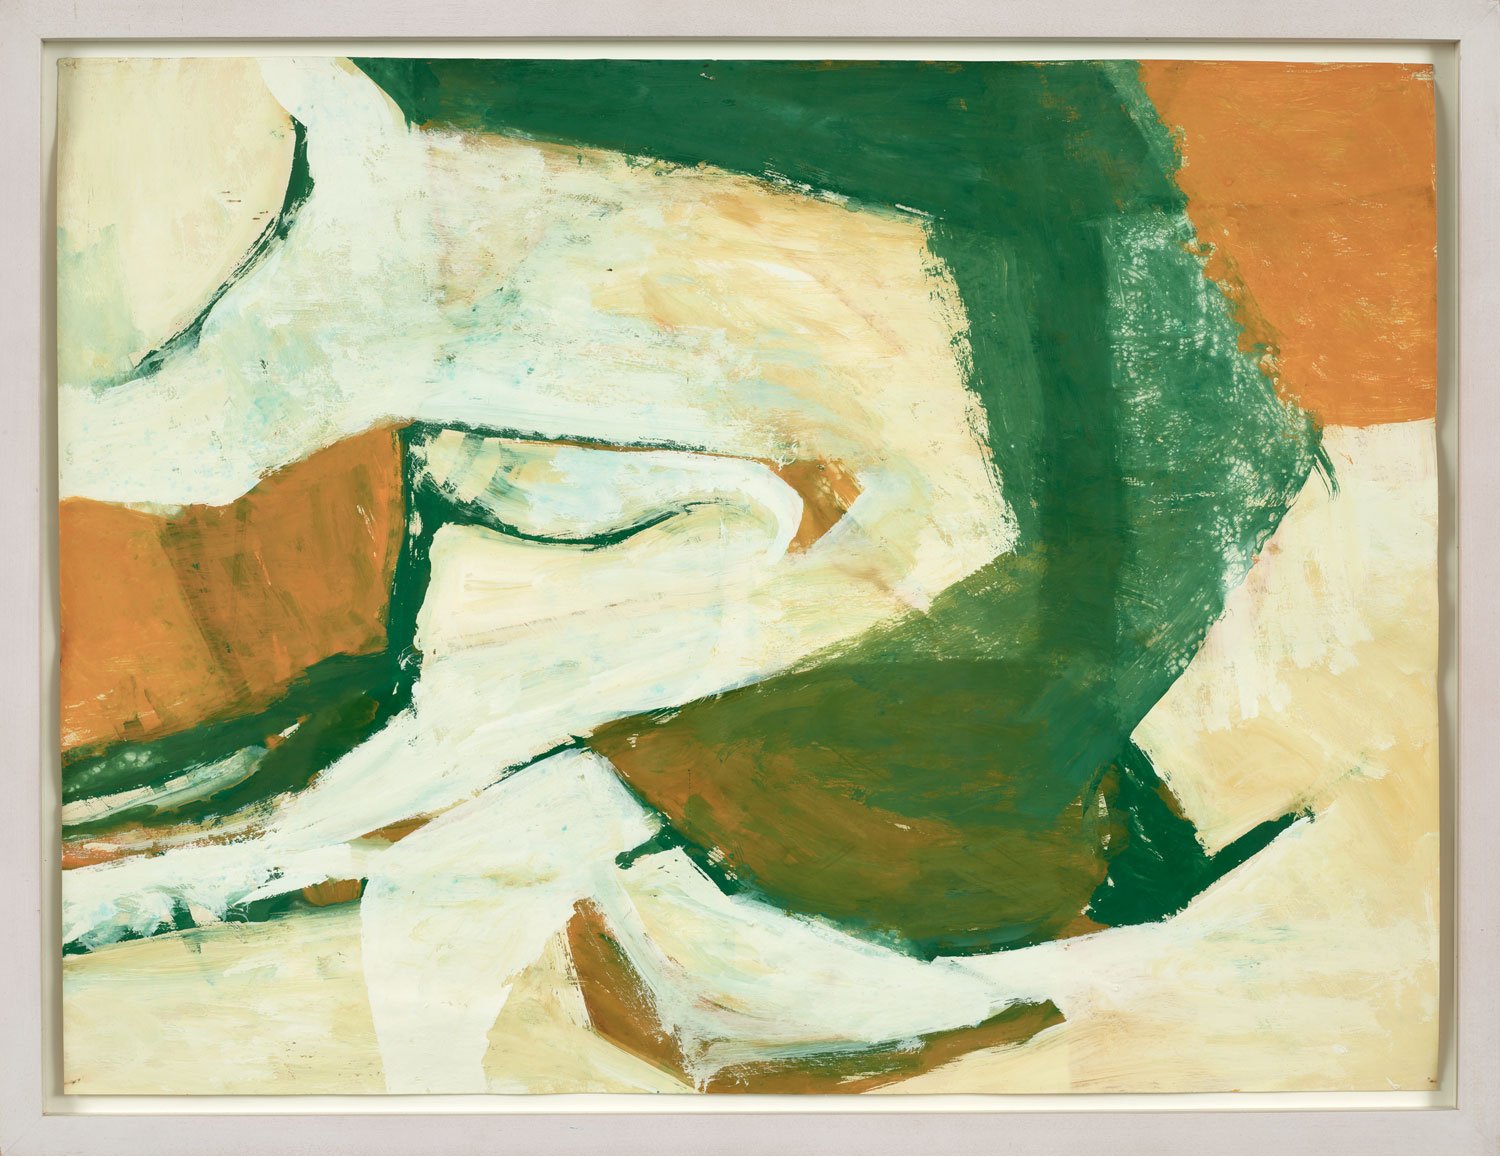 Charlotte Park, Untitled (Green, Yellow, and White)